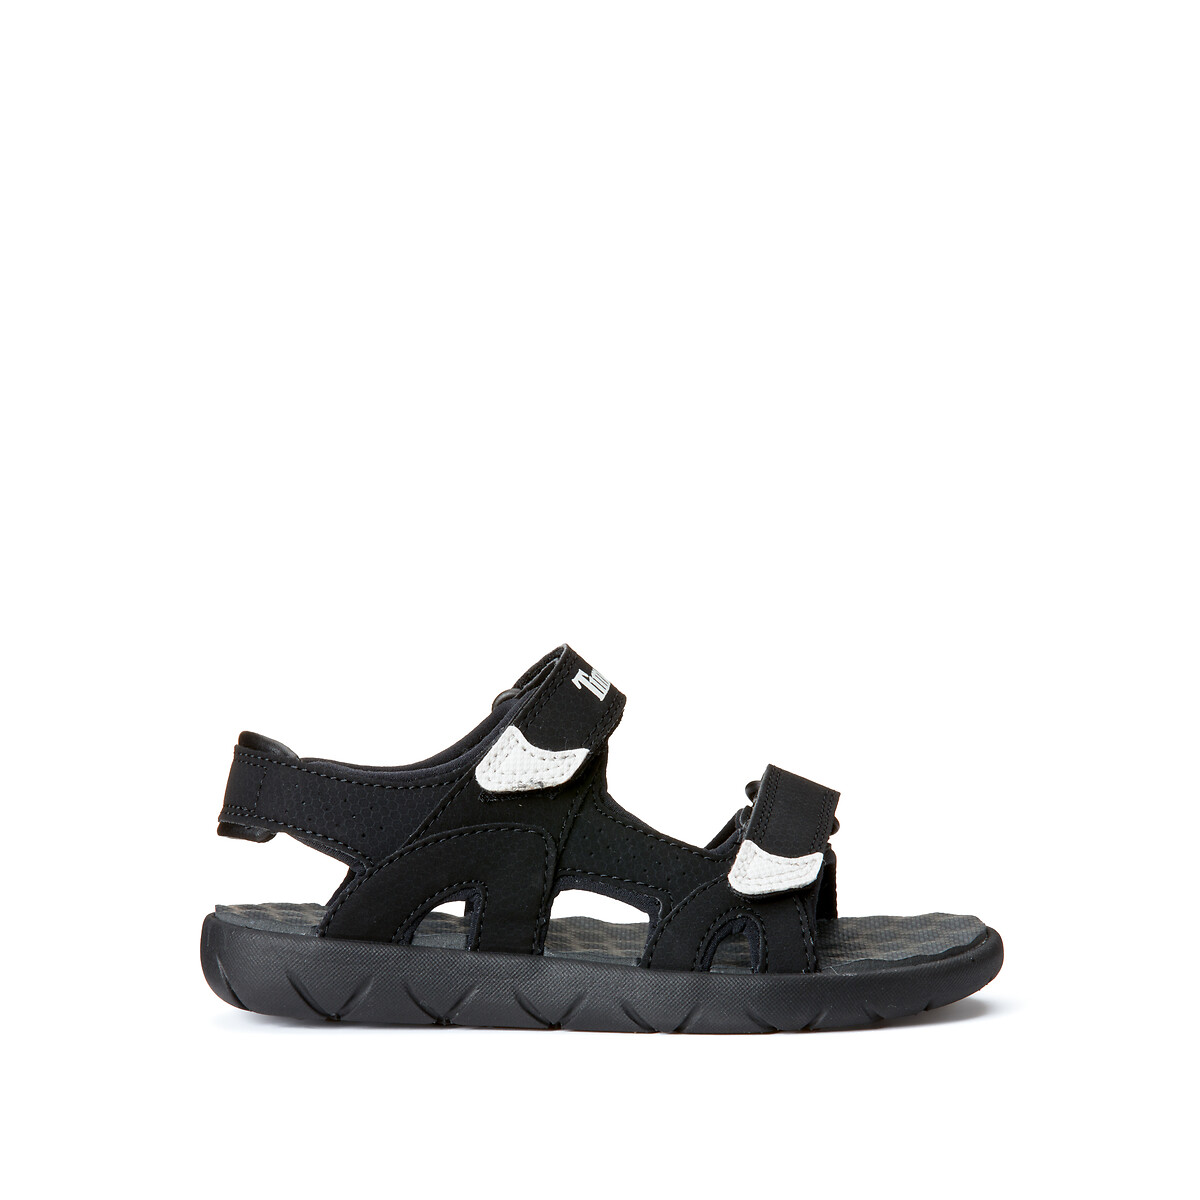 Kids Perkins Row 2-Strap Sandals in Leather with Touch ’n’ Close Fastening